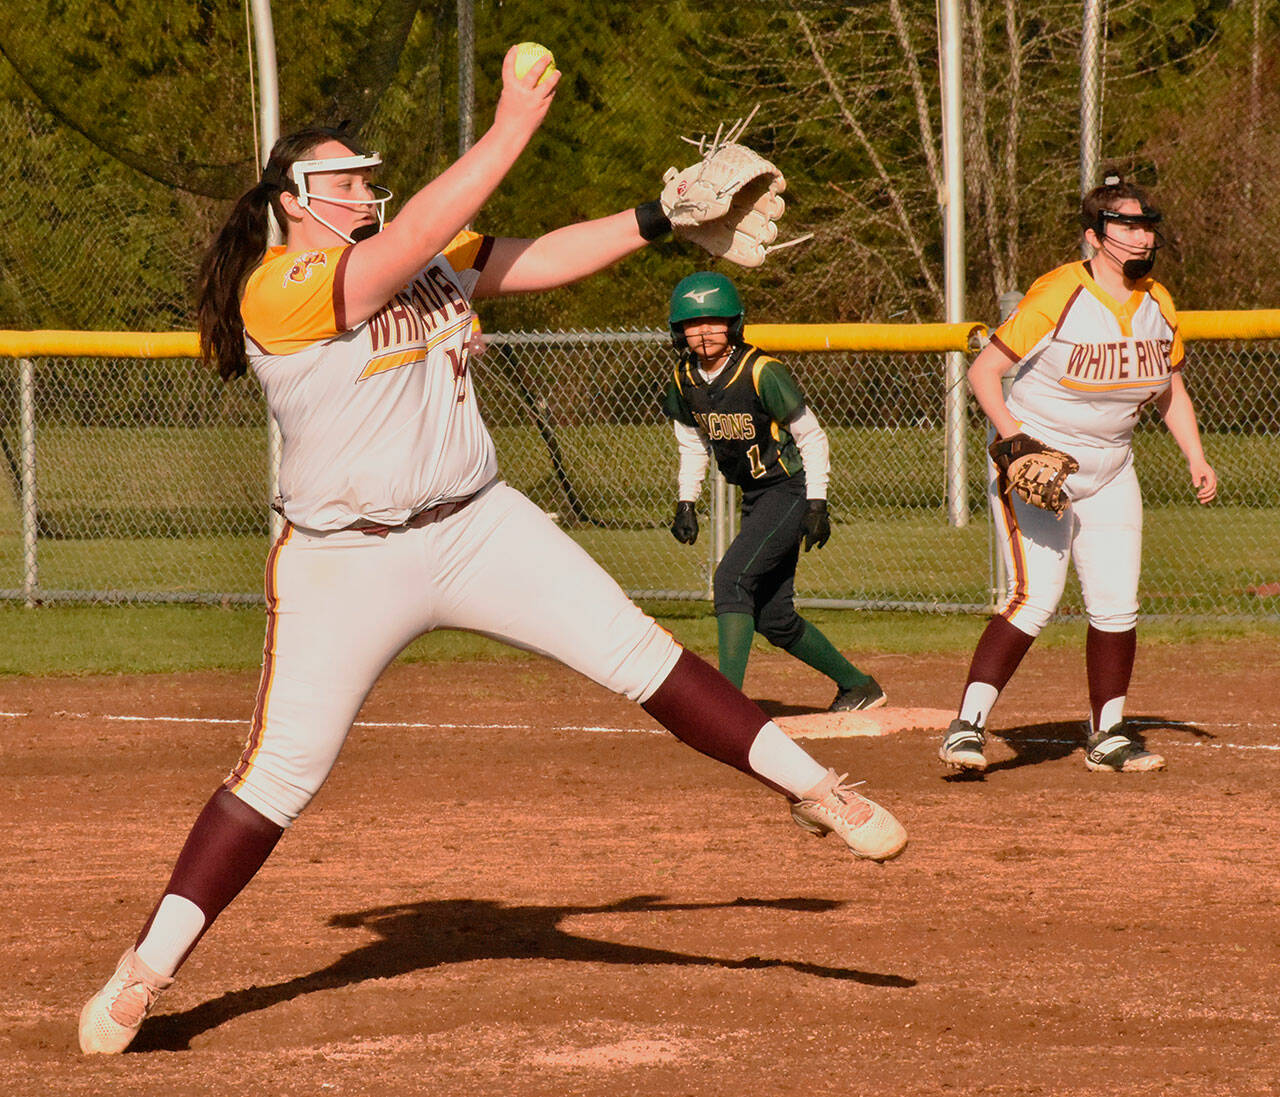 The White River girls jumped out to an undefeated start of the fastpitch season, going 5-0 through games of last week (4-0 in SPSL 2A play). Among the reasons was the pitching of freshman Elliotte Kajita, shown here delivering during an 18-0, home-field victory on March 22. She picked up another victory two days later when the Hornets defeated Steilacoom. Kajita didn’t allow an earned run in either contest while striking out 13 and issuing just one base on balls. Photo by Kevin Hanson